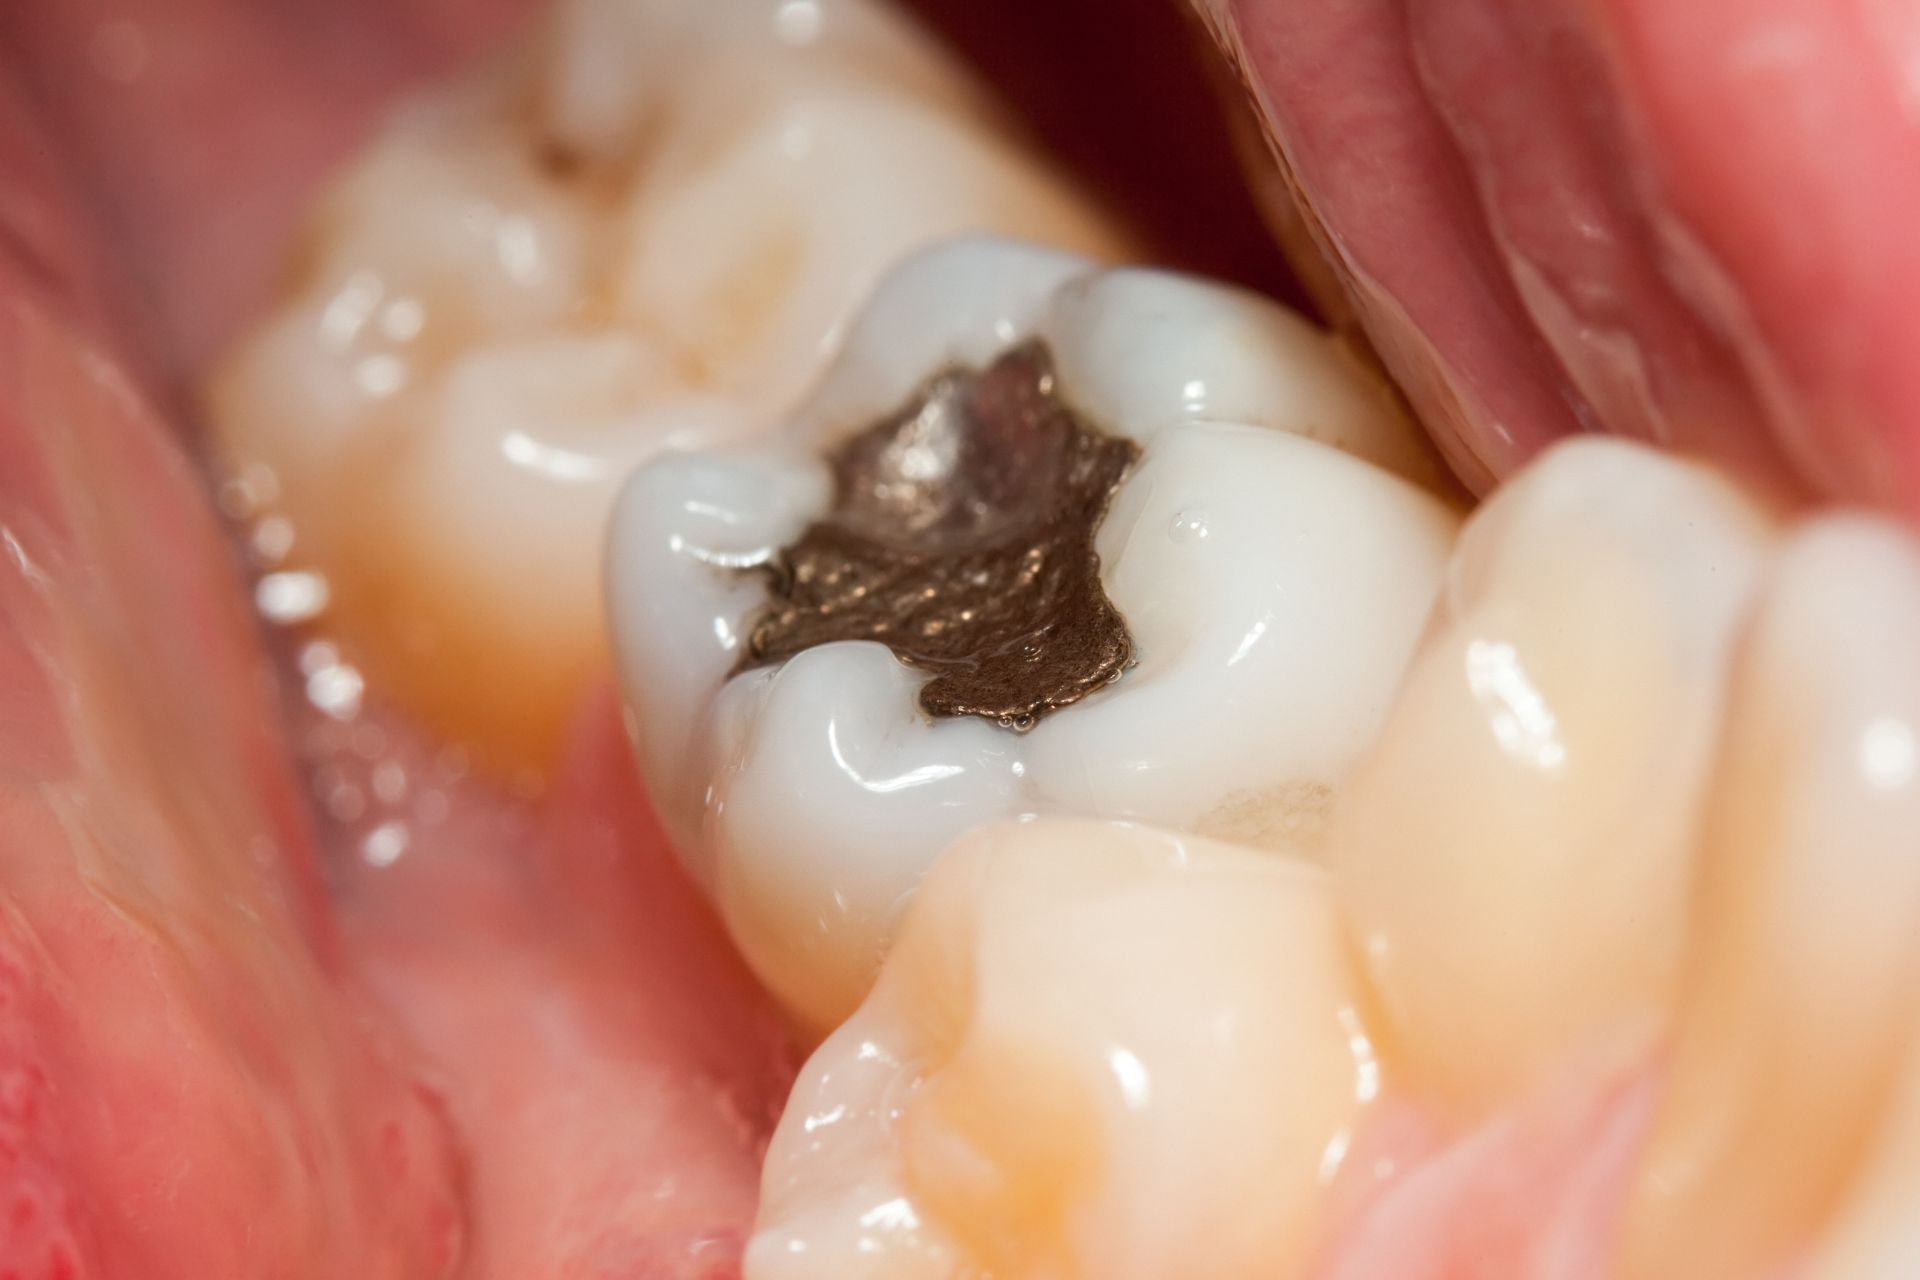 Close up of filling in tooth